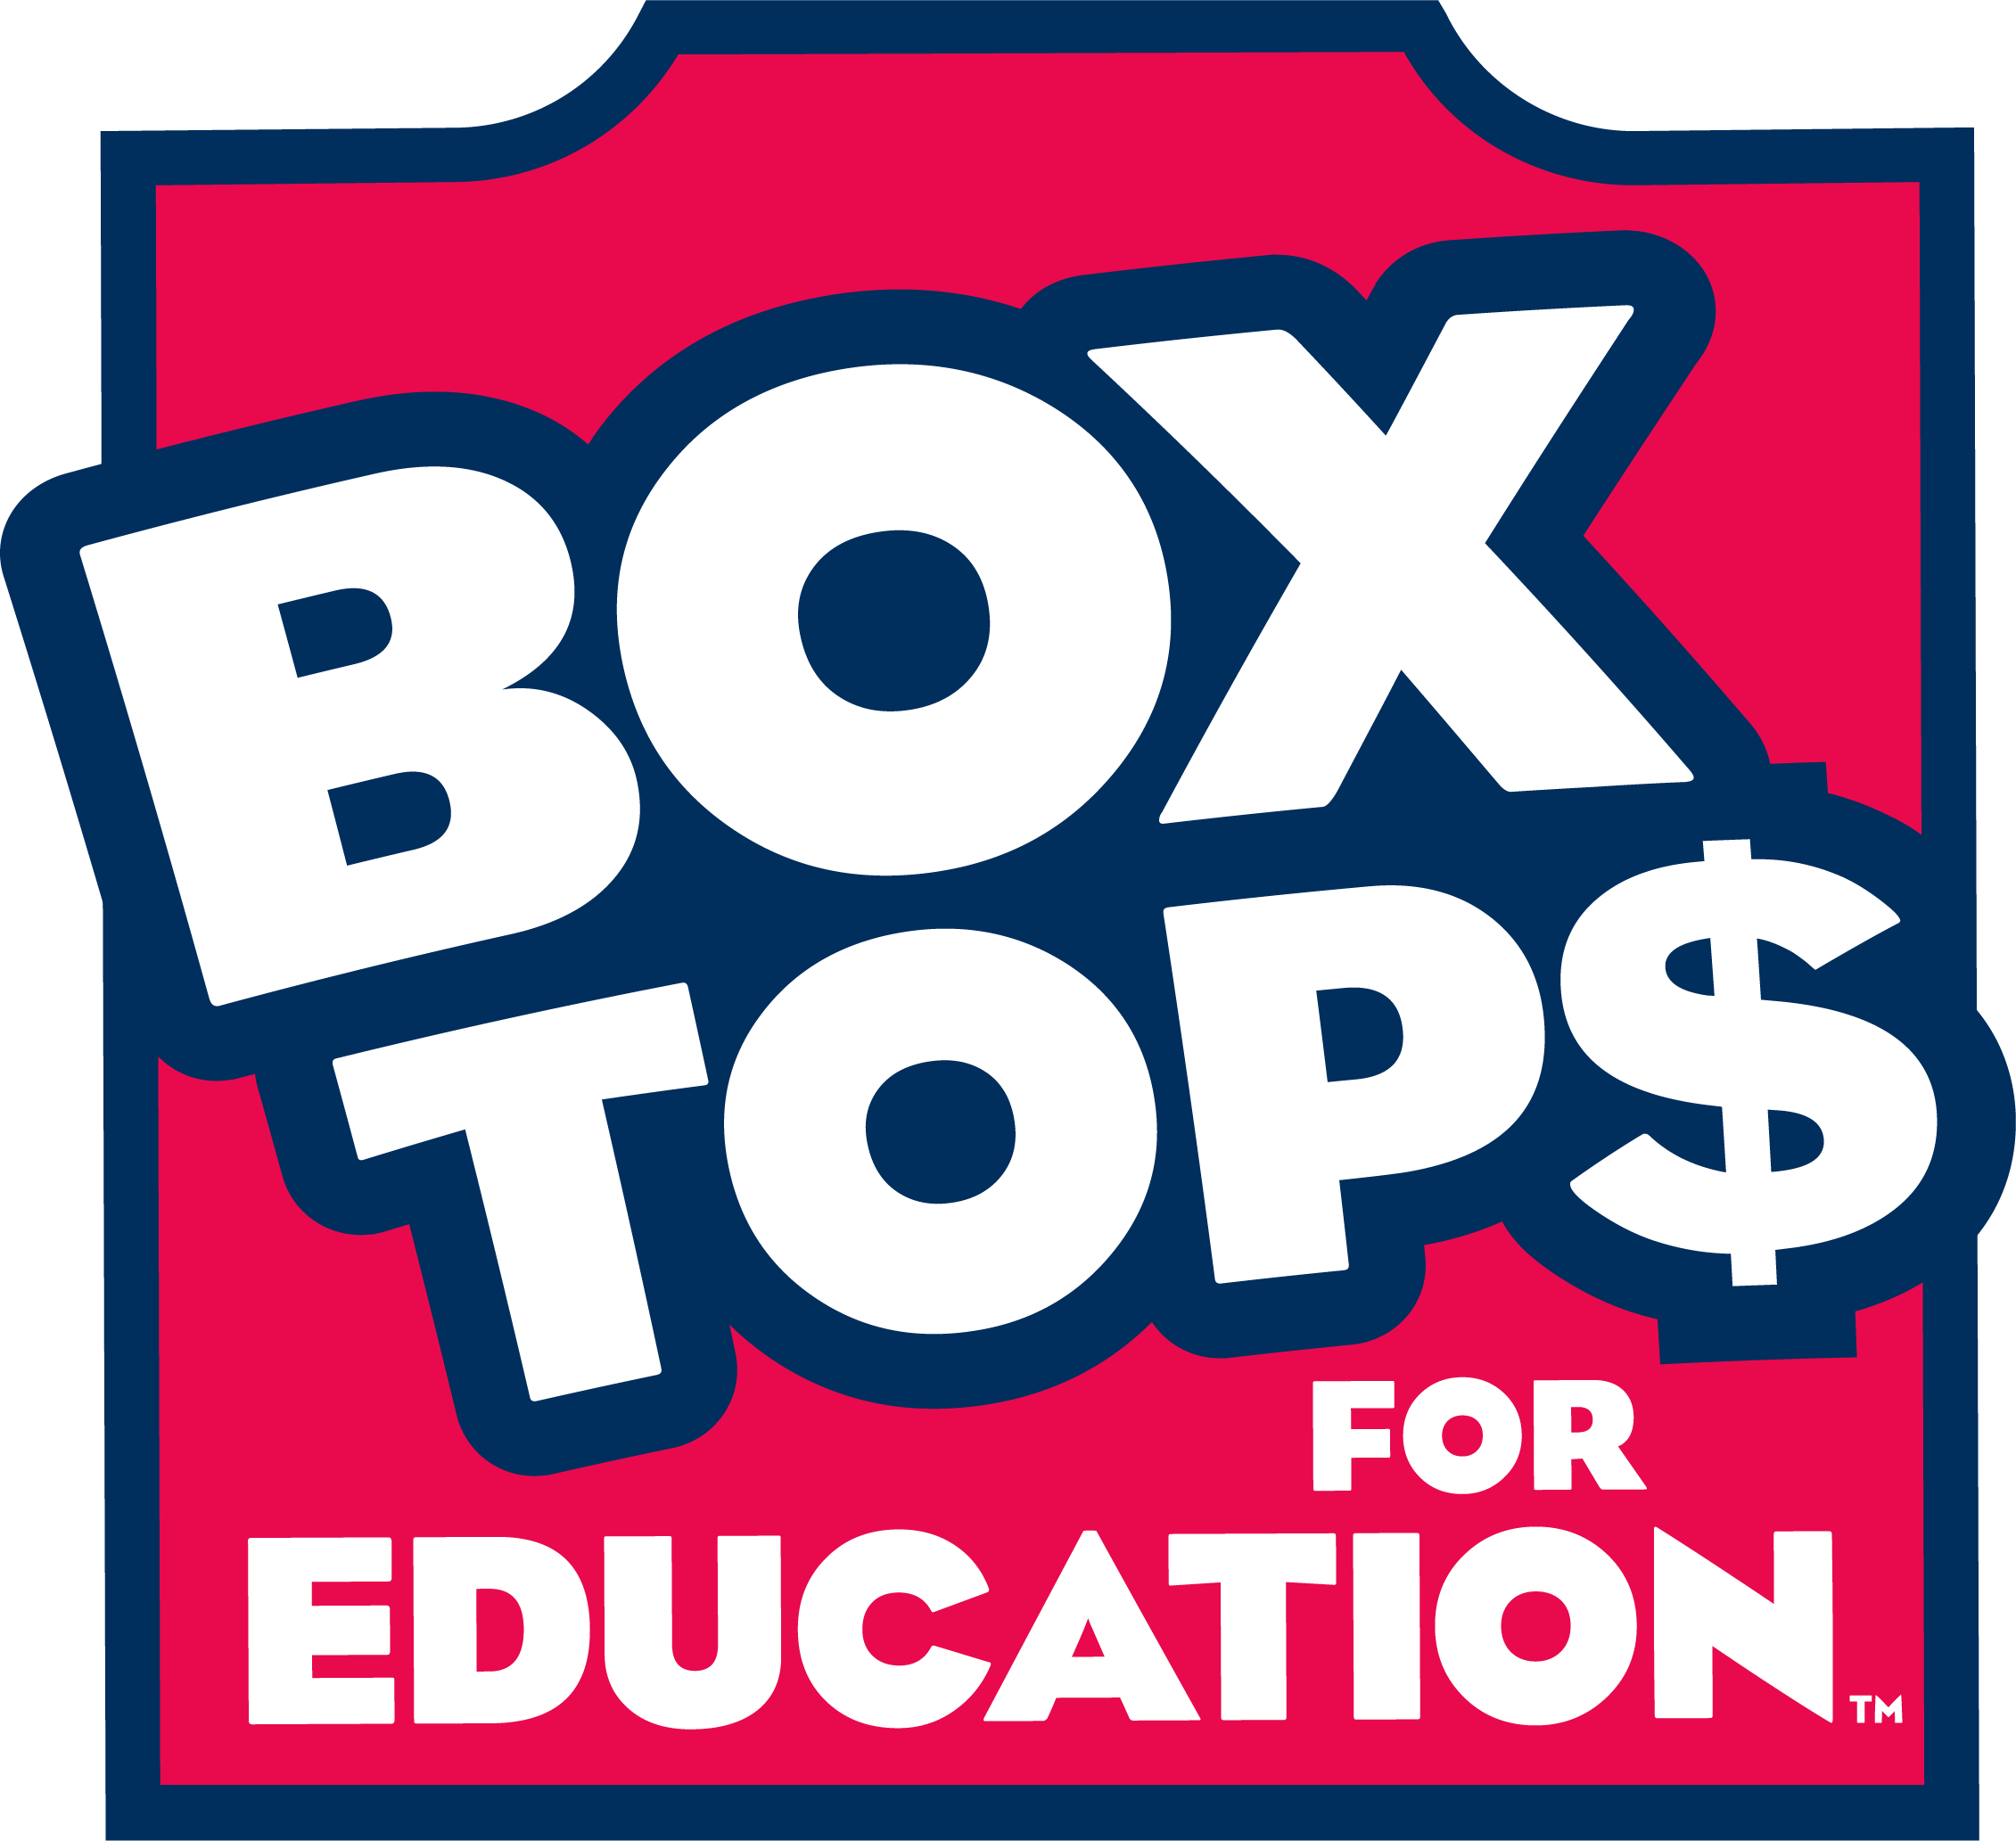 Boxtops for Education graphic and link